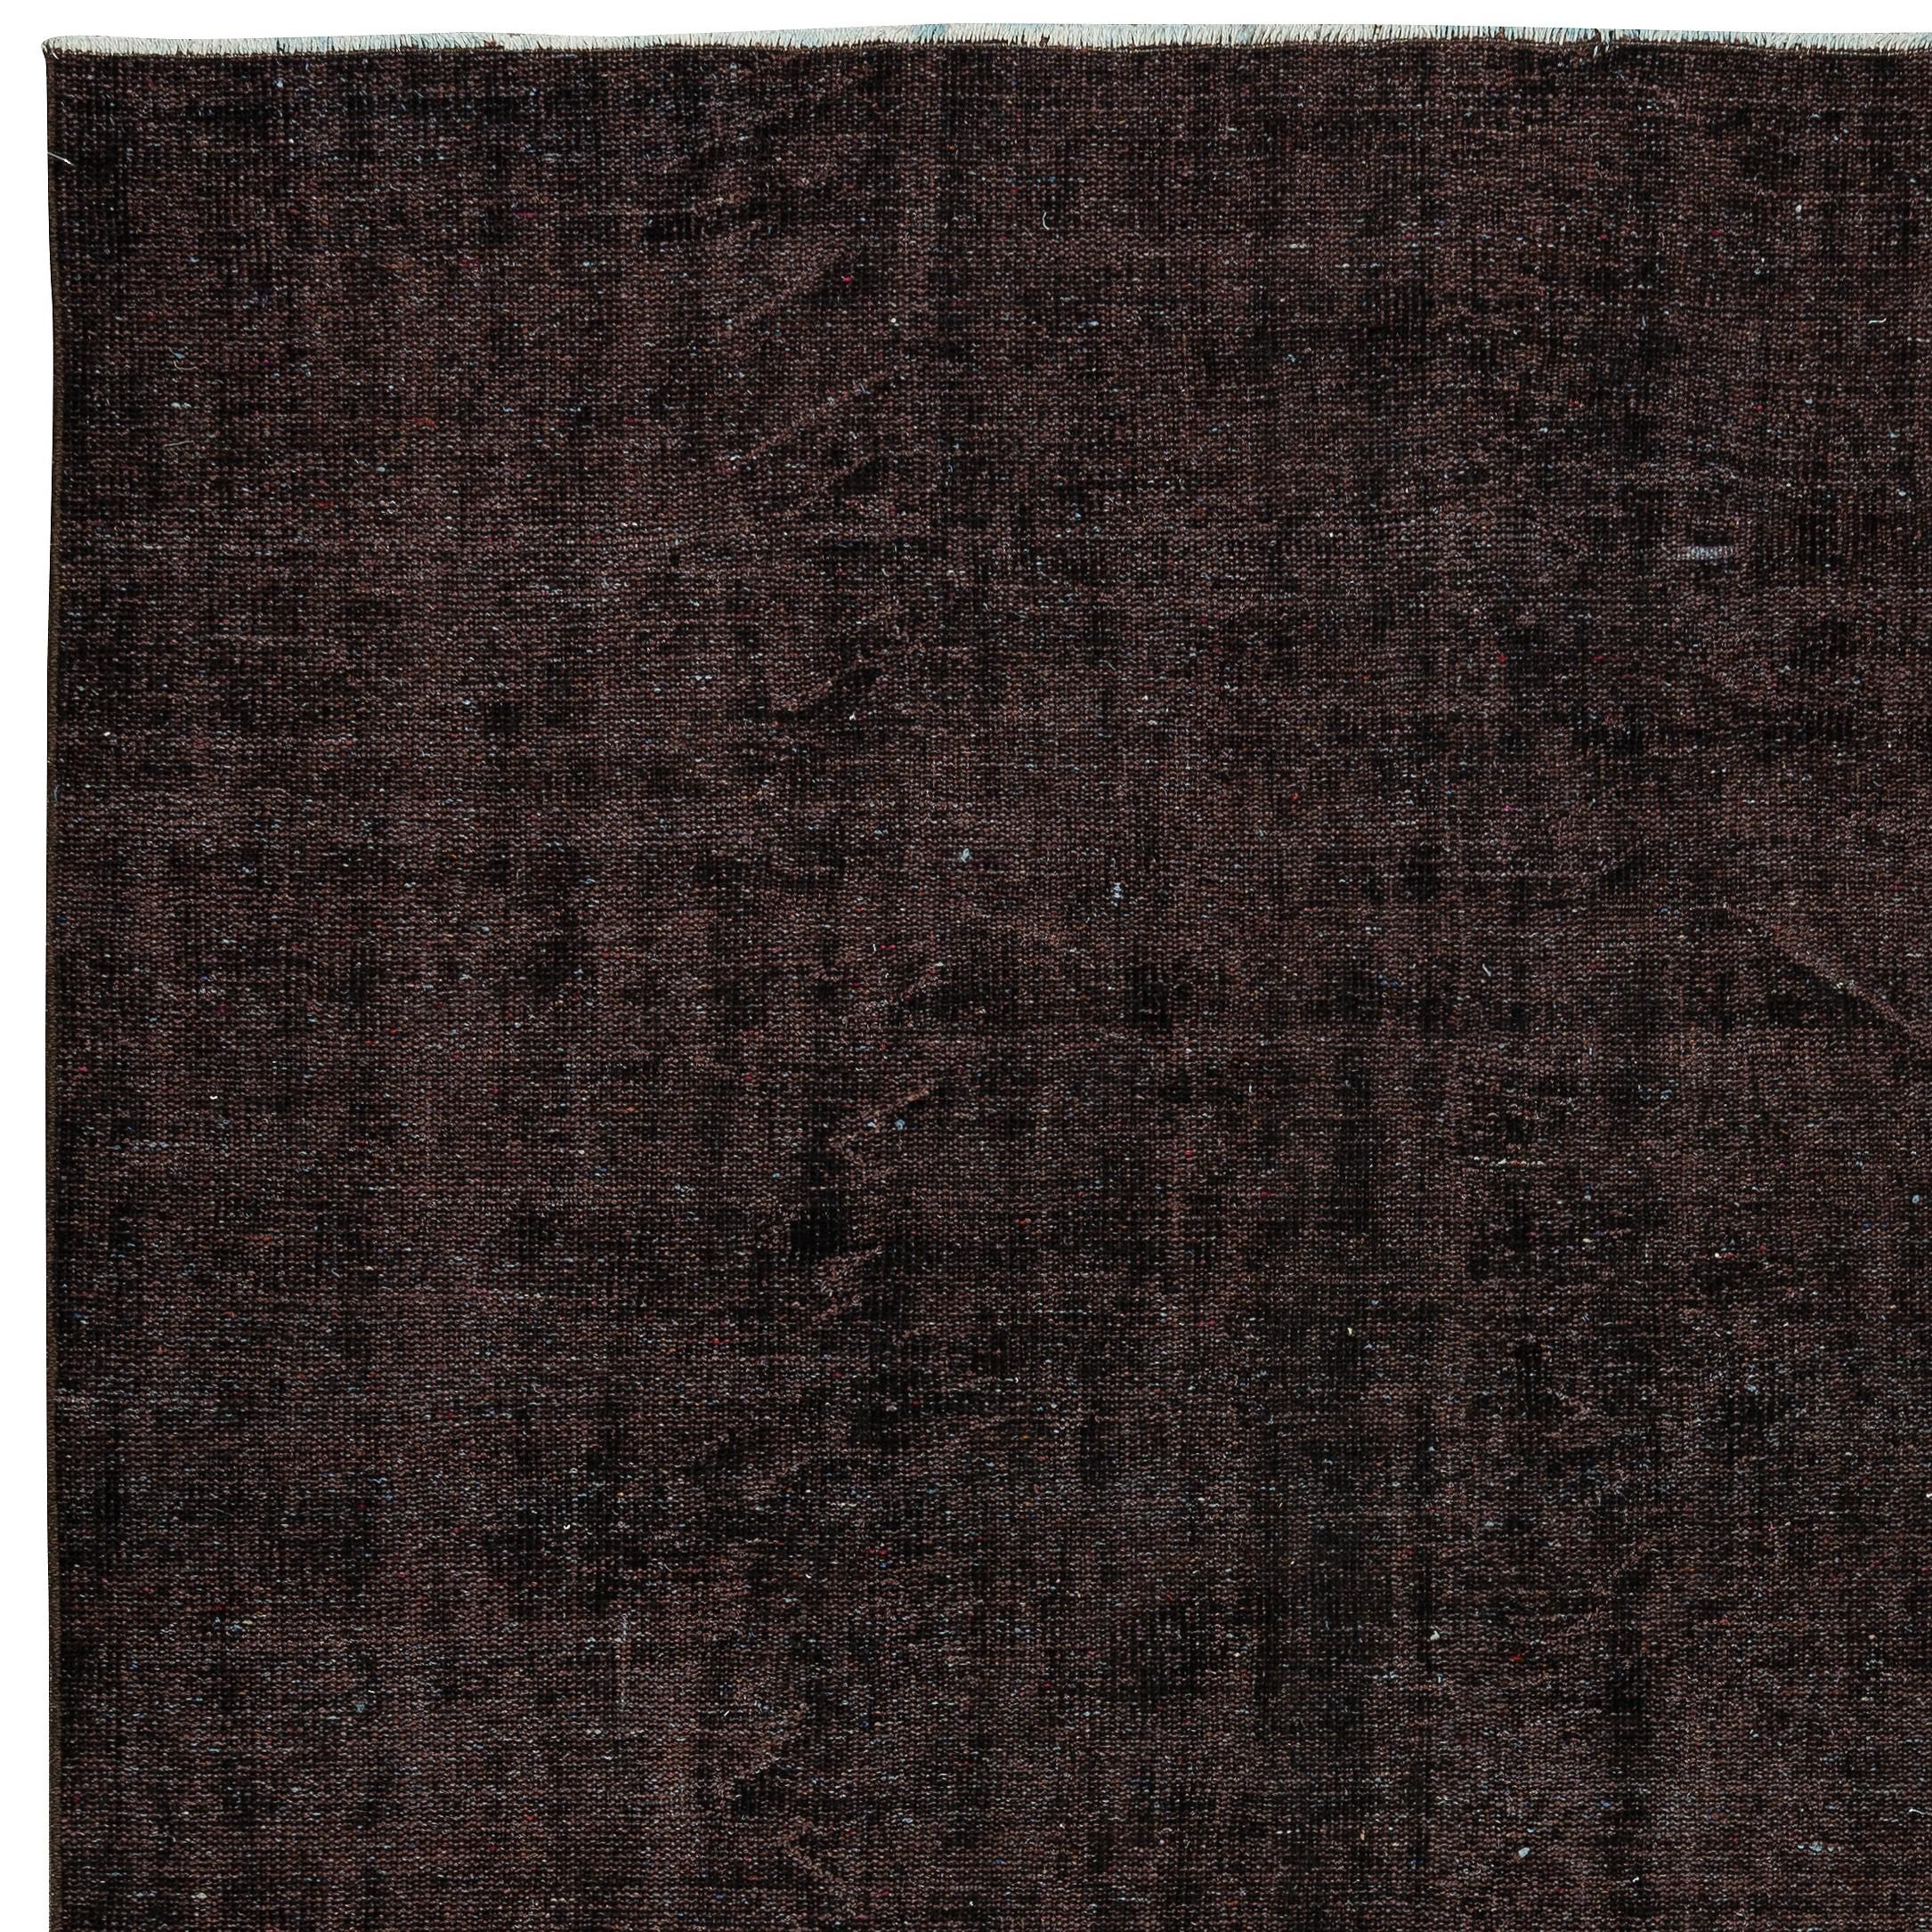 5.8x10 Ft Handmade Vintage Turkish Wool Rug in Solid Brown 4 Modern Interiors In Good Condition For Sale In Philadelphia, PA